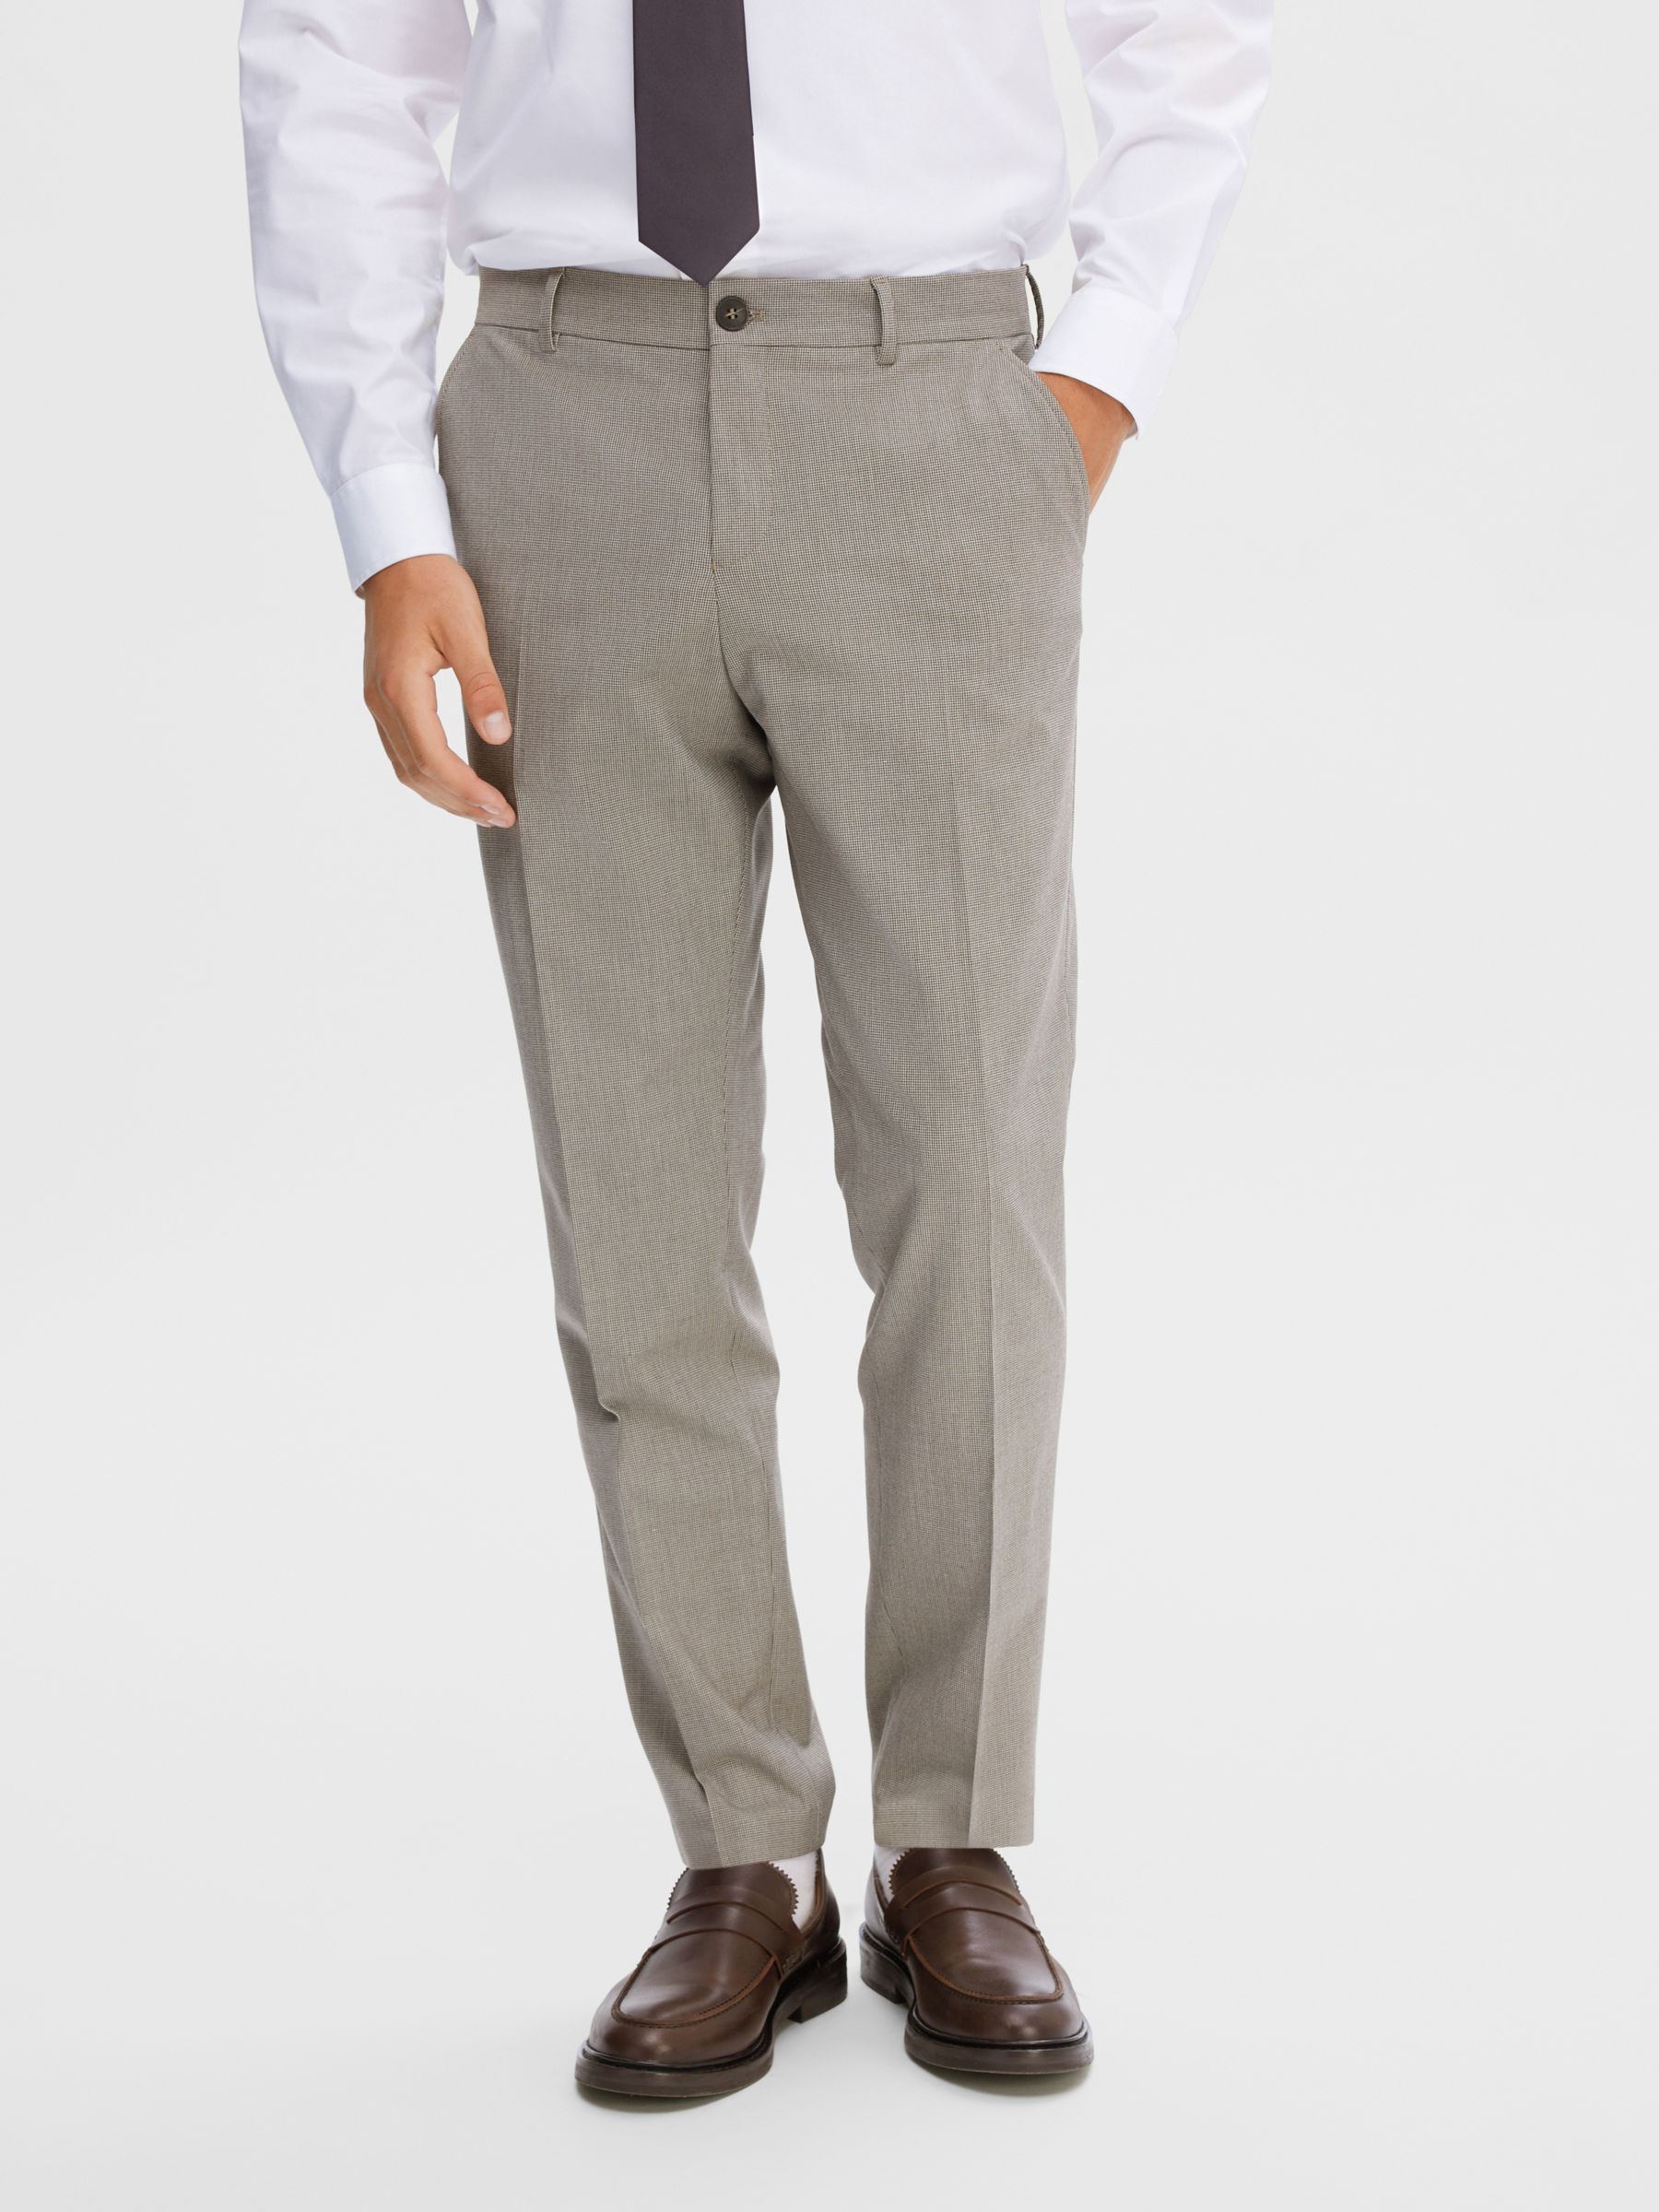 MENS BLACK SOLID TAPERED FIT TROUSER  JDC Store Online Shopping